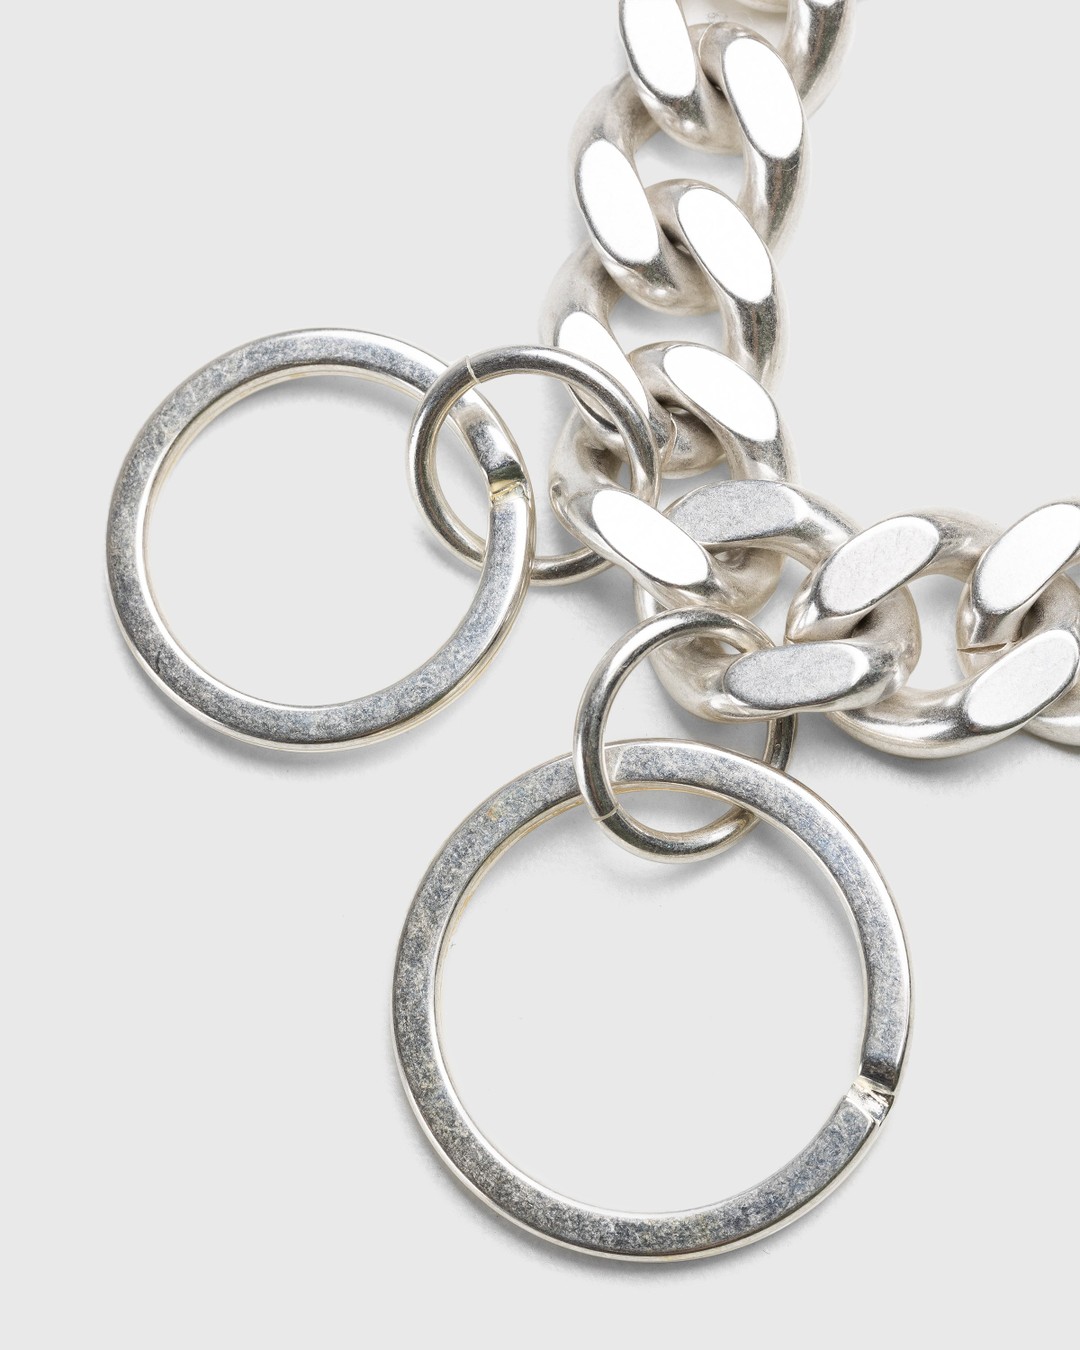 Jil Sander – Chain Link Key Ring Silver - Keychains - Silver - Image 2